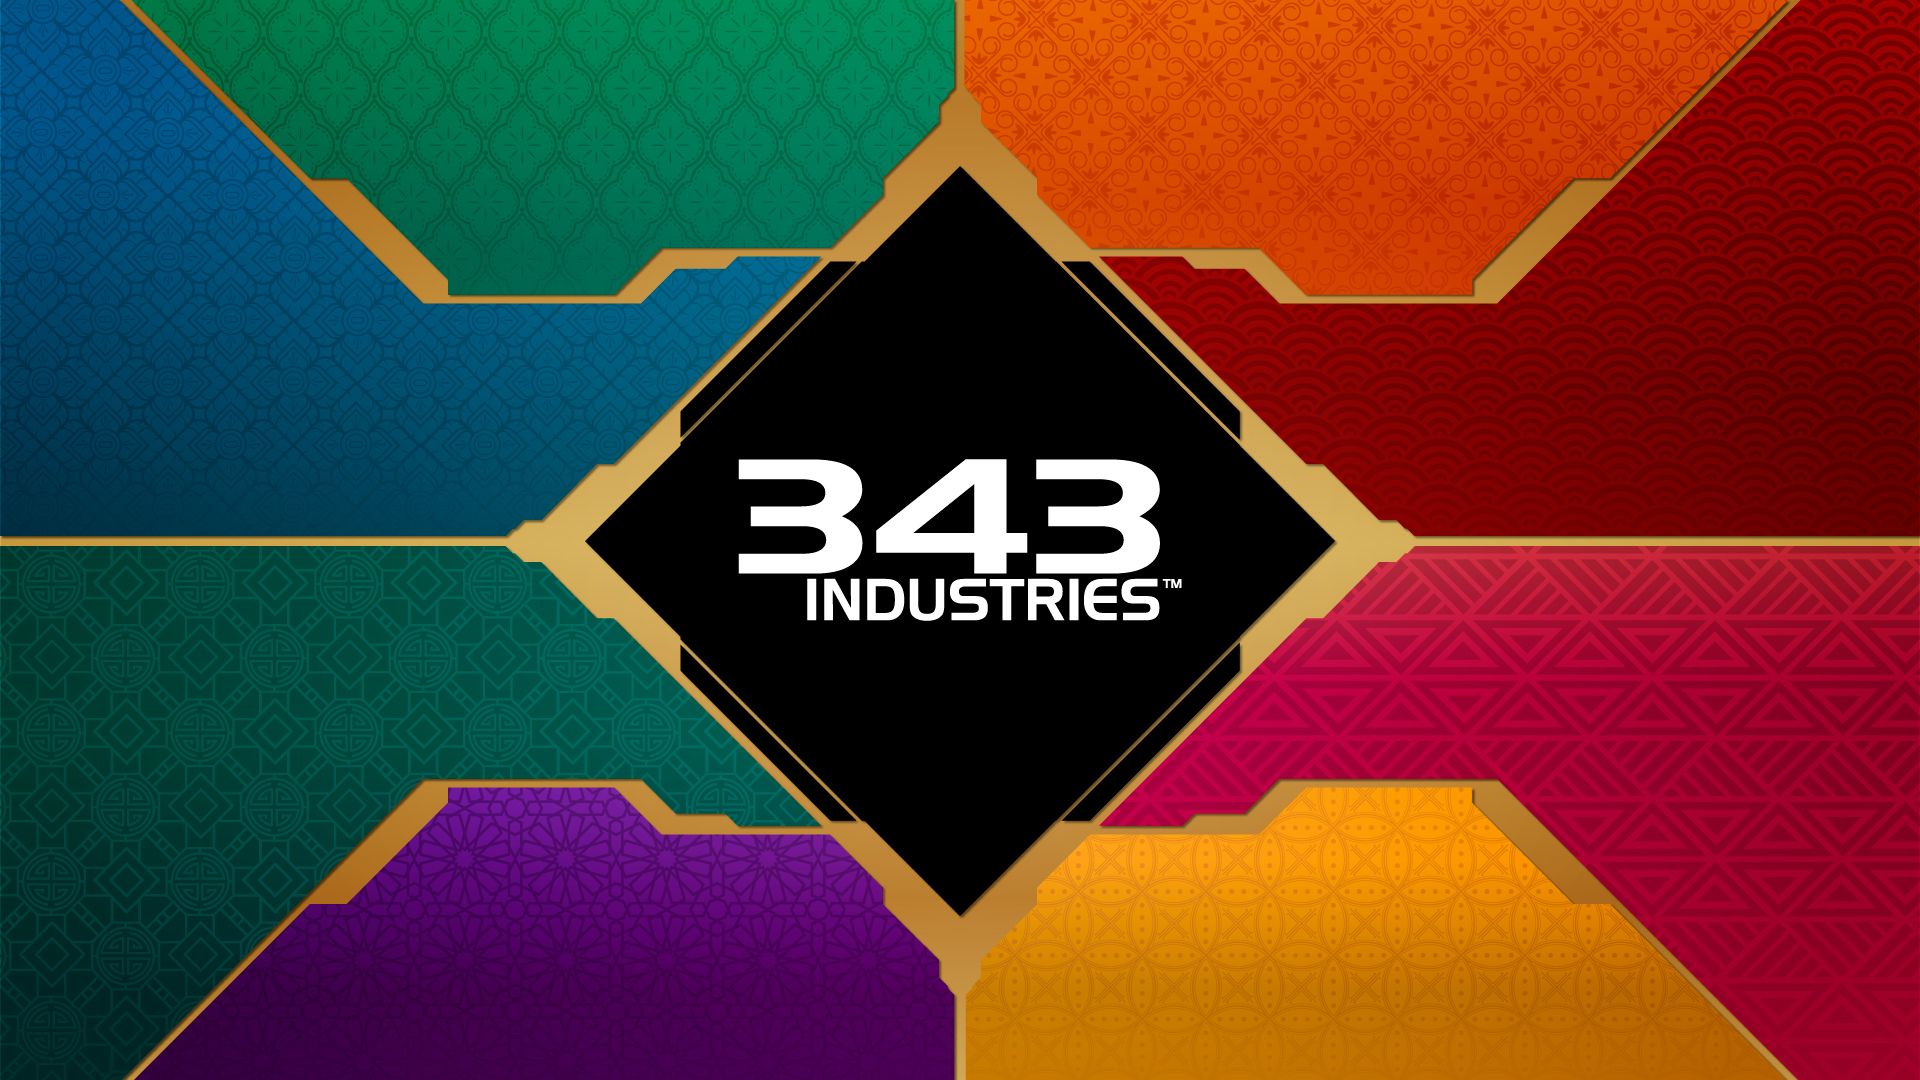 343 Industries logo written in white text surrounded by a black diamond shape, surrounded by the colors blue, green, orange, red and purple with gold accents.